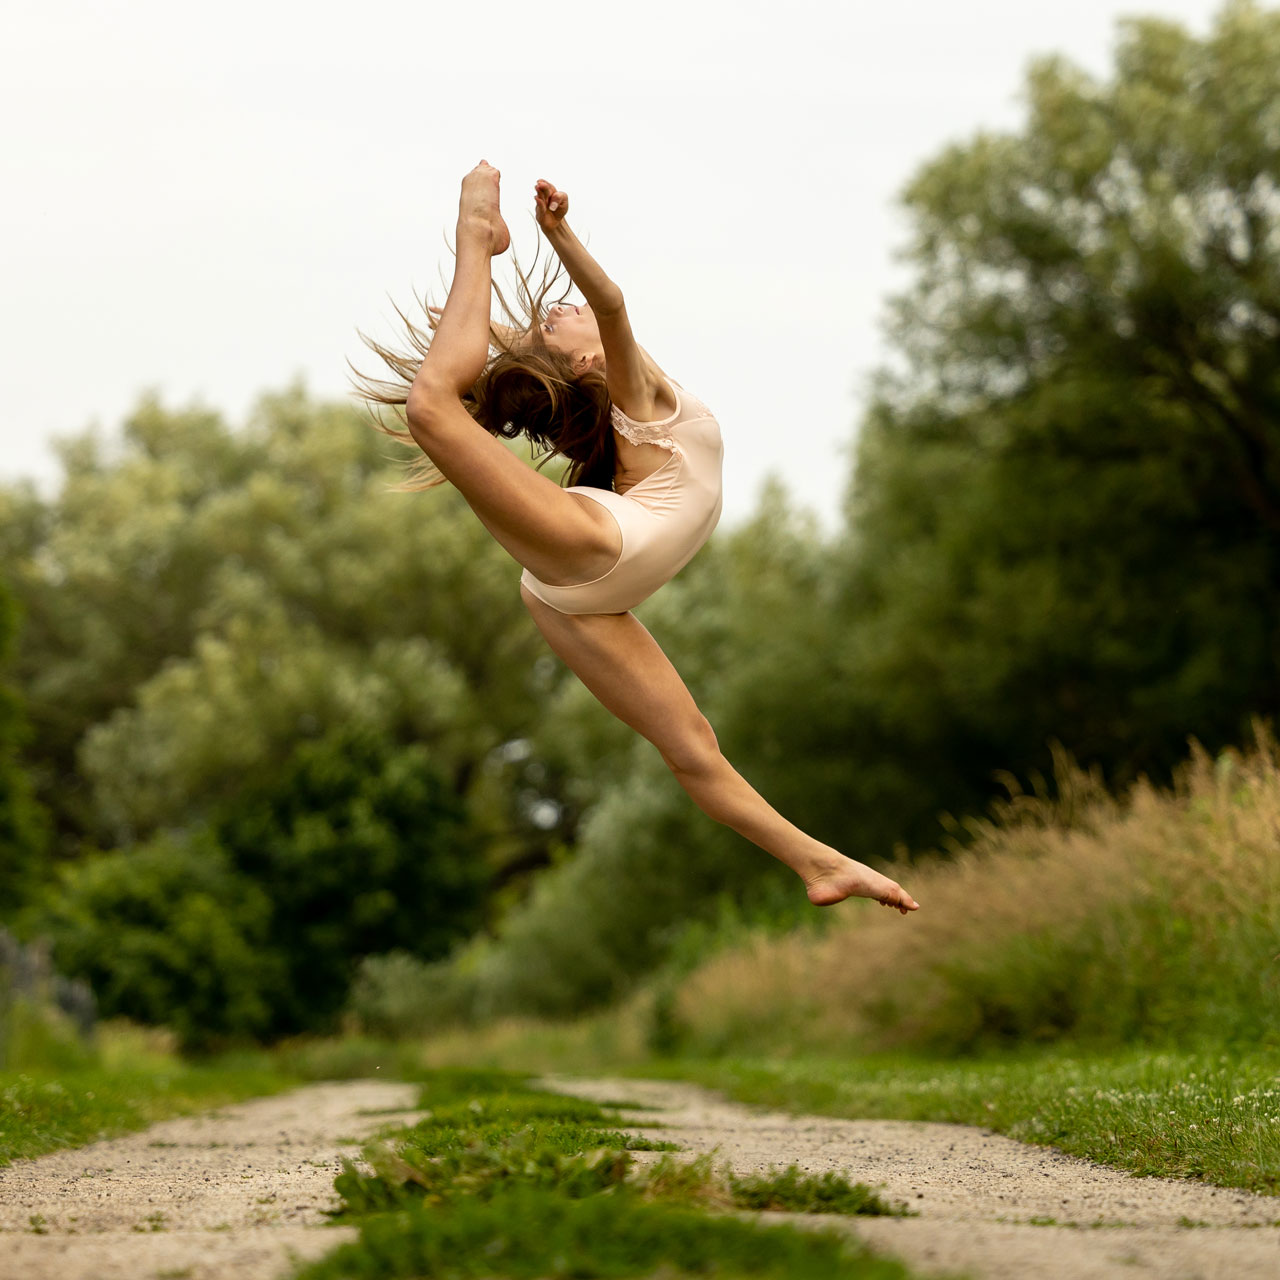 Young dancer in light beige leotard mid leap with leg bent behind her in outdoor dance photoshoot on a dirt road with Exulting Images